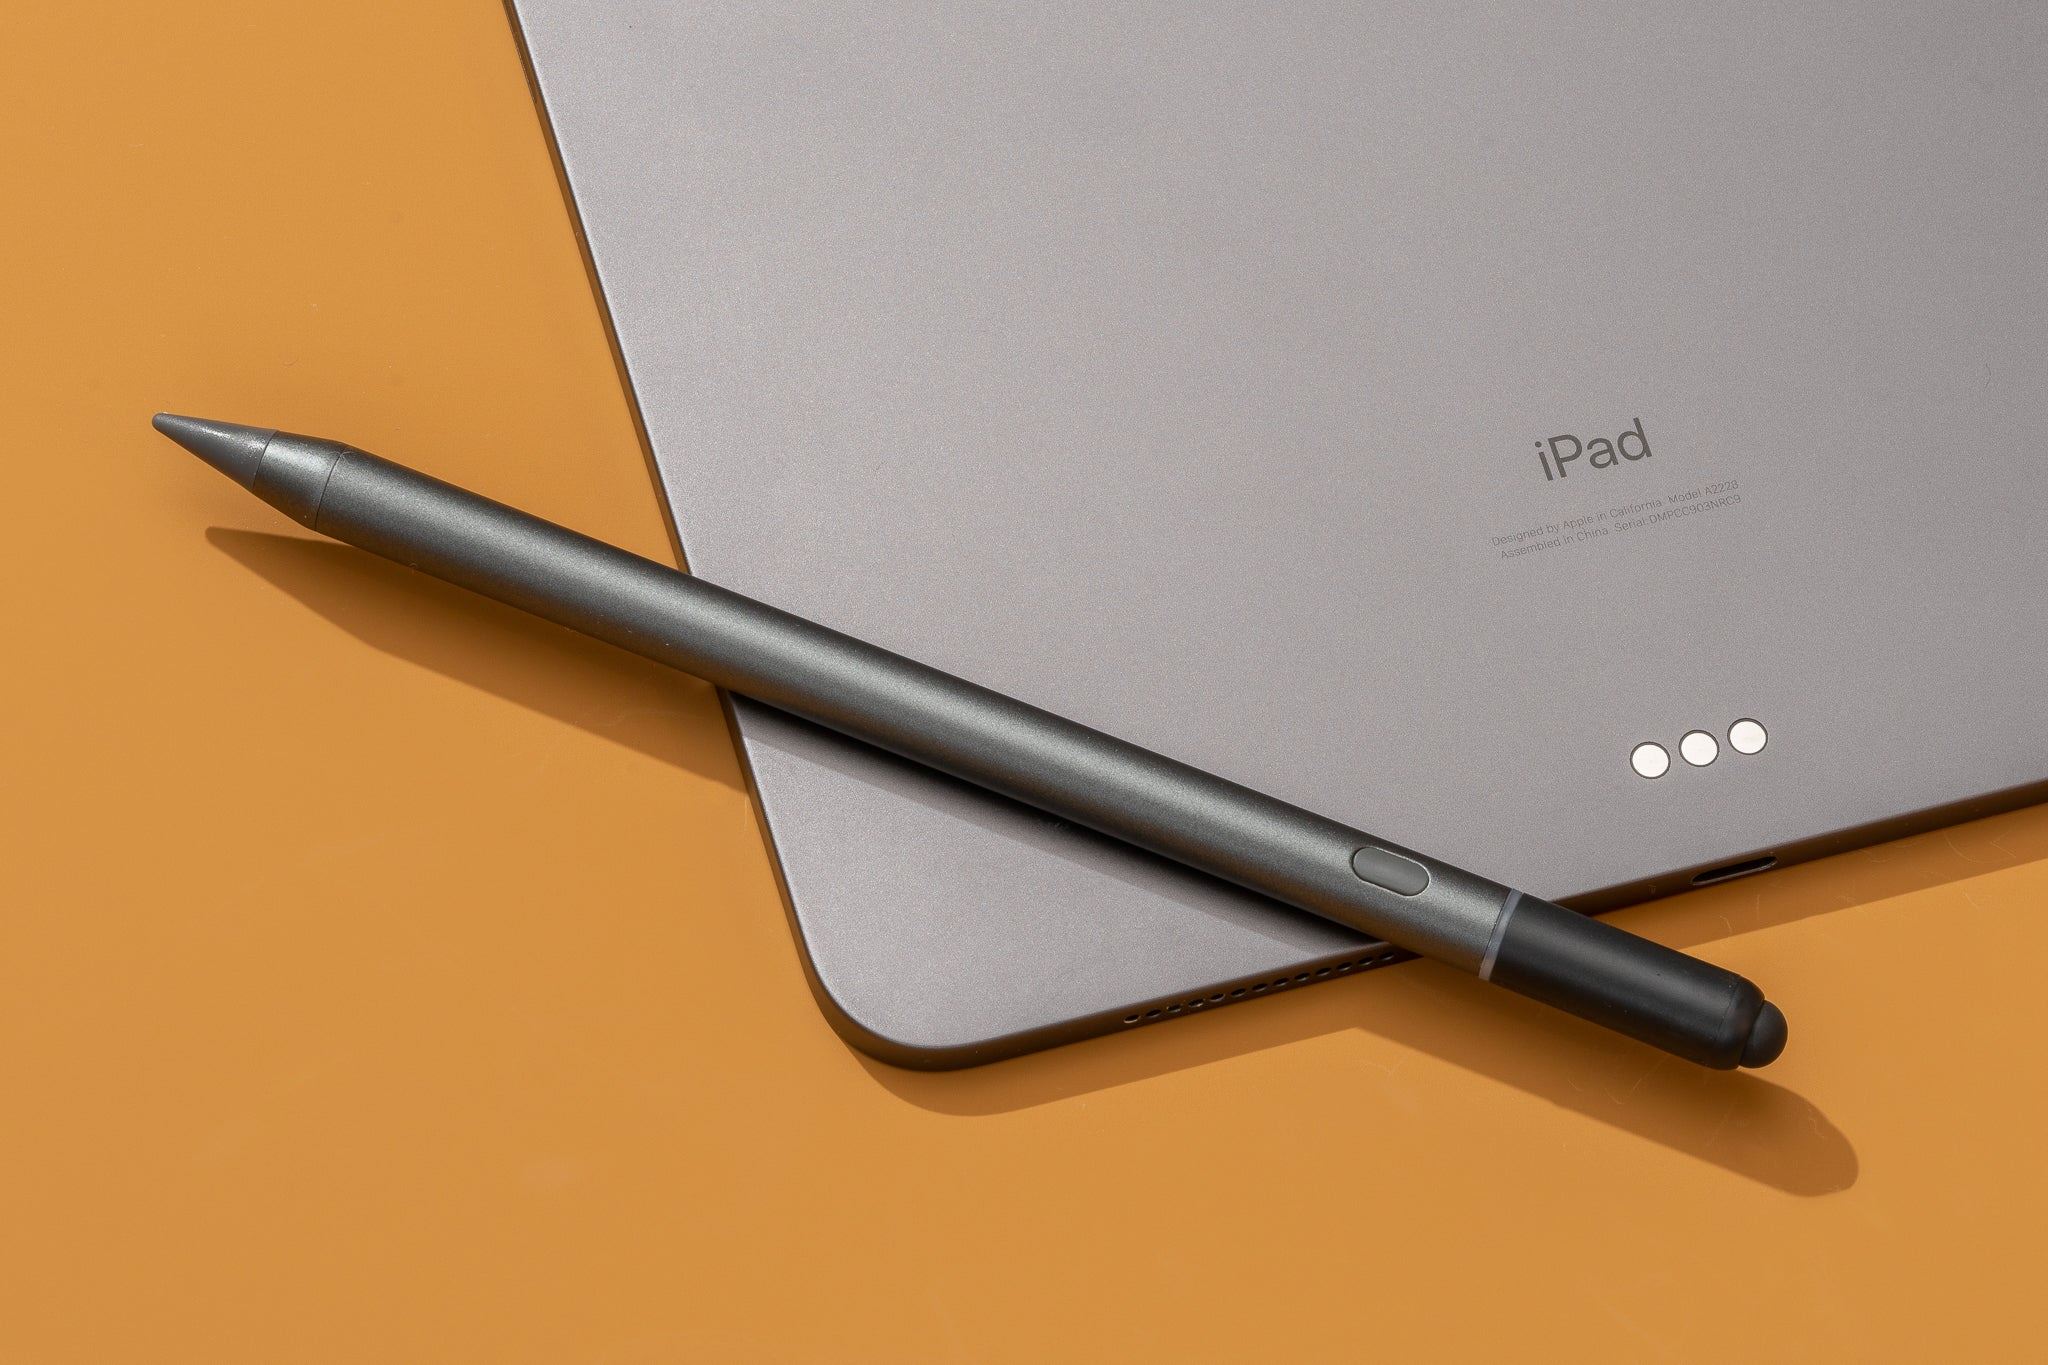 IPad Integration: Connecting Your Stylus Pen